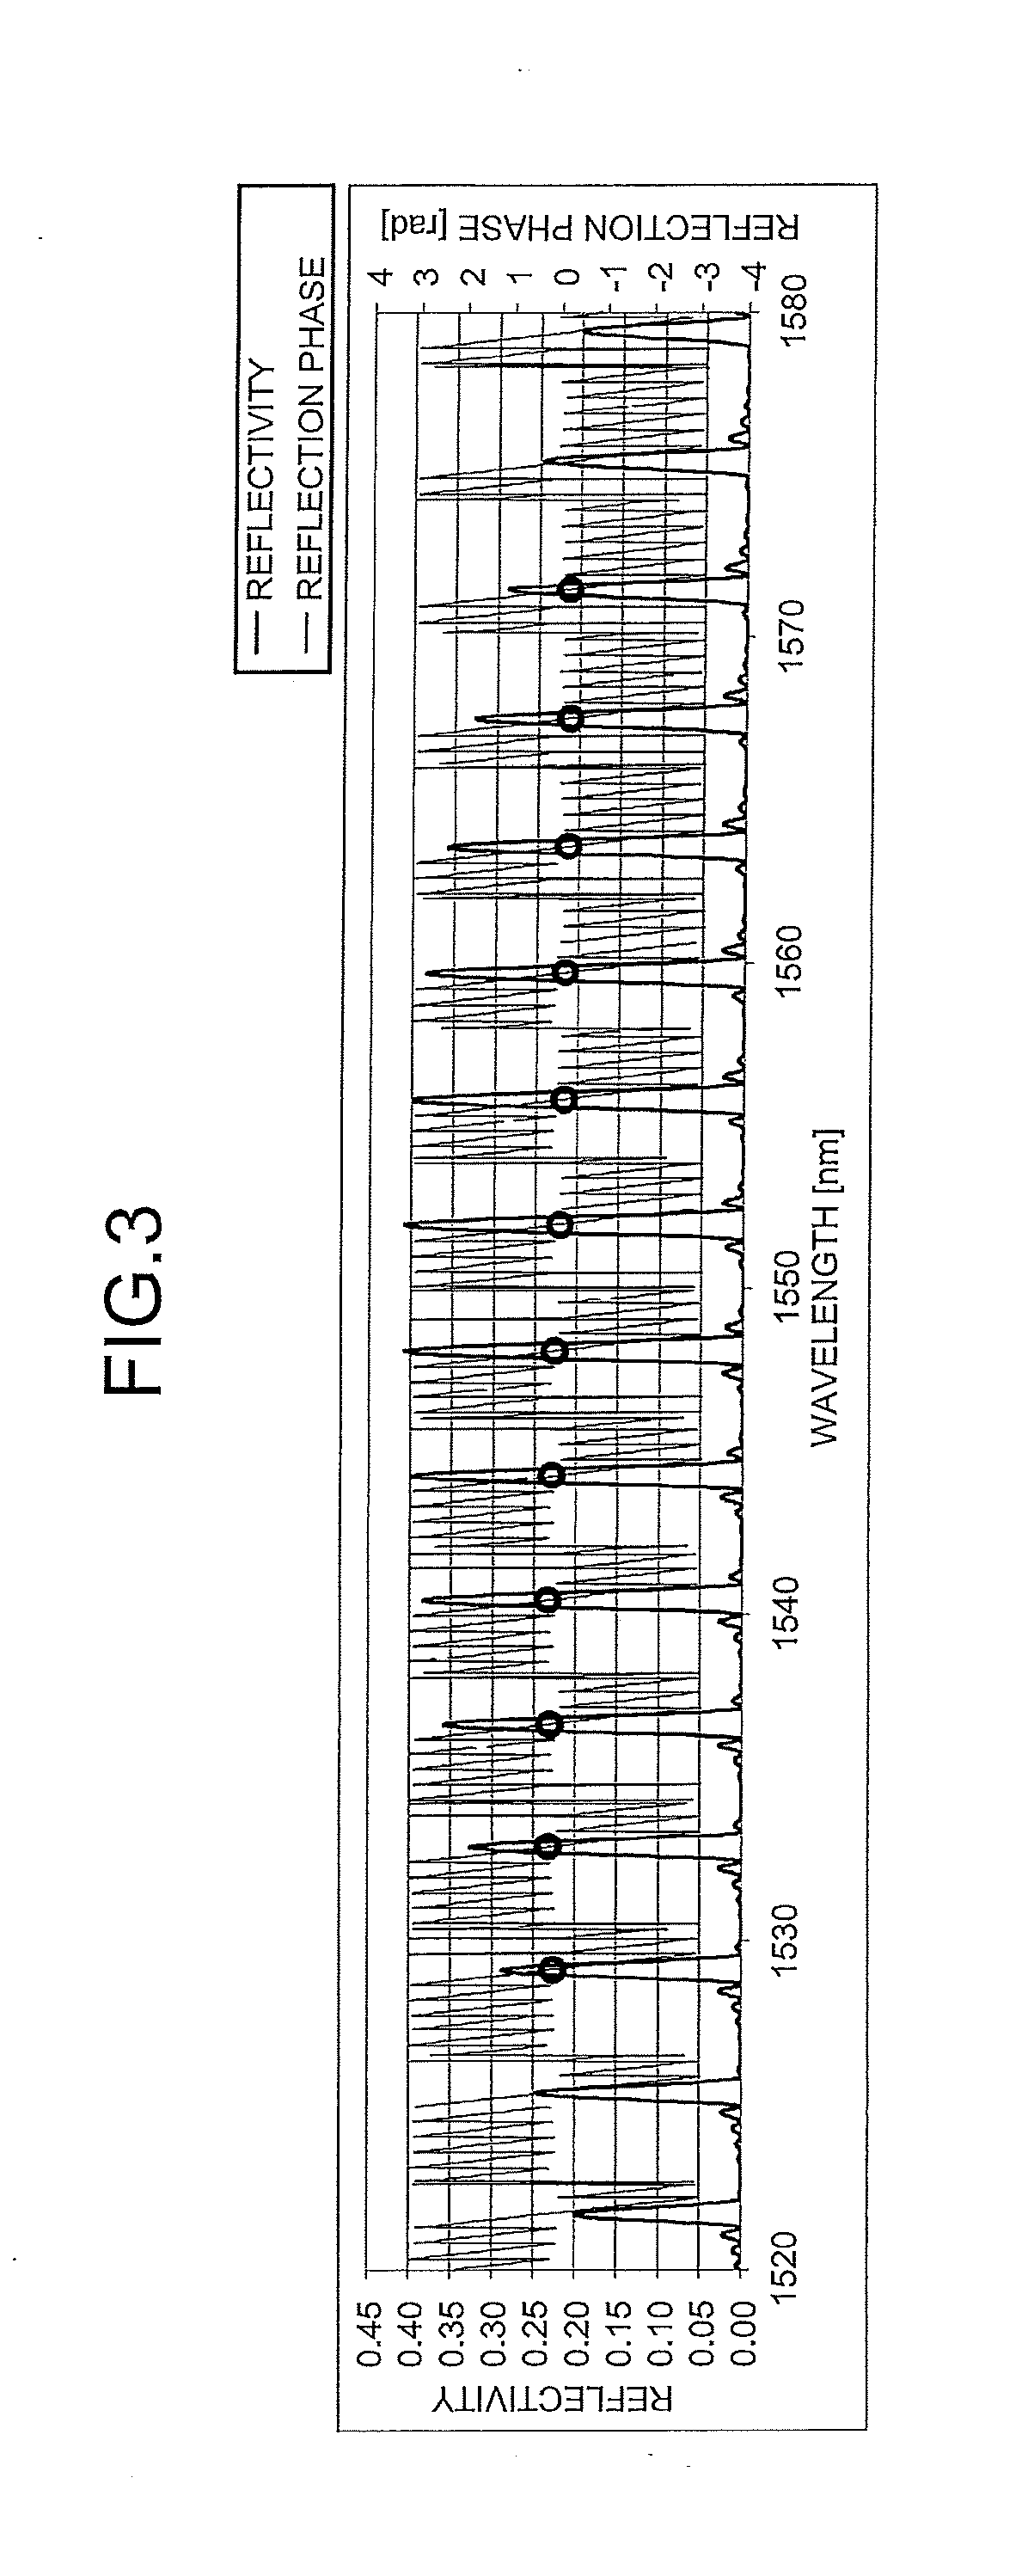 Semiconductor laser device, diffraction grating structure, and diffraction grating